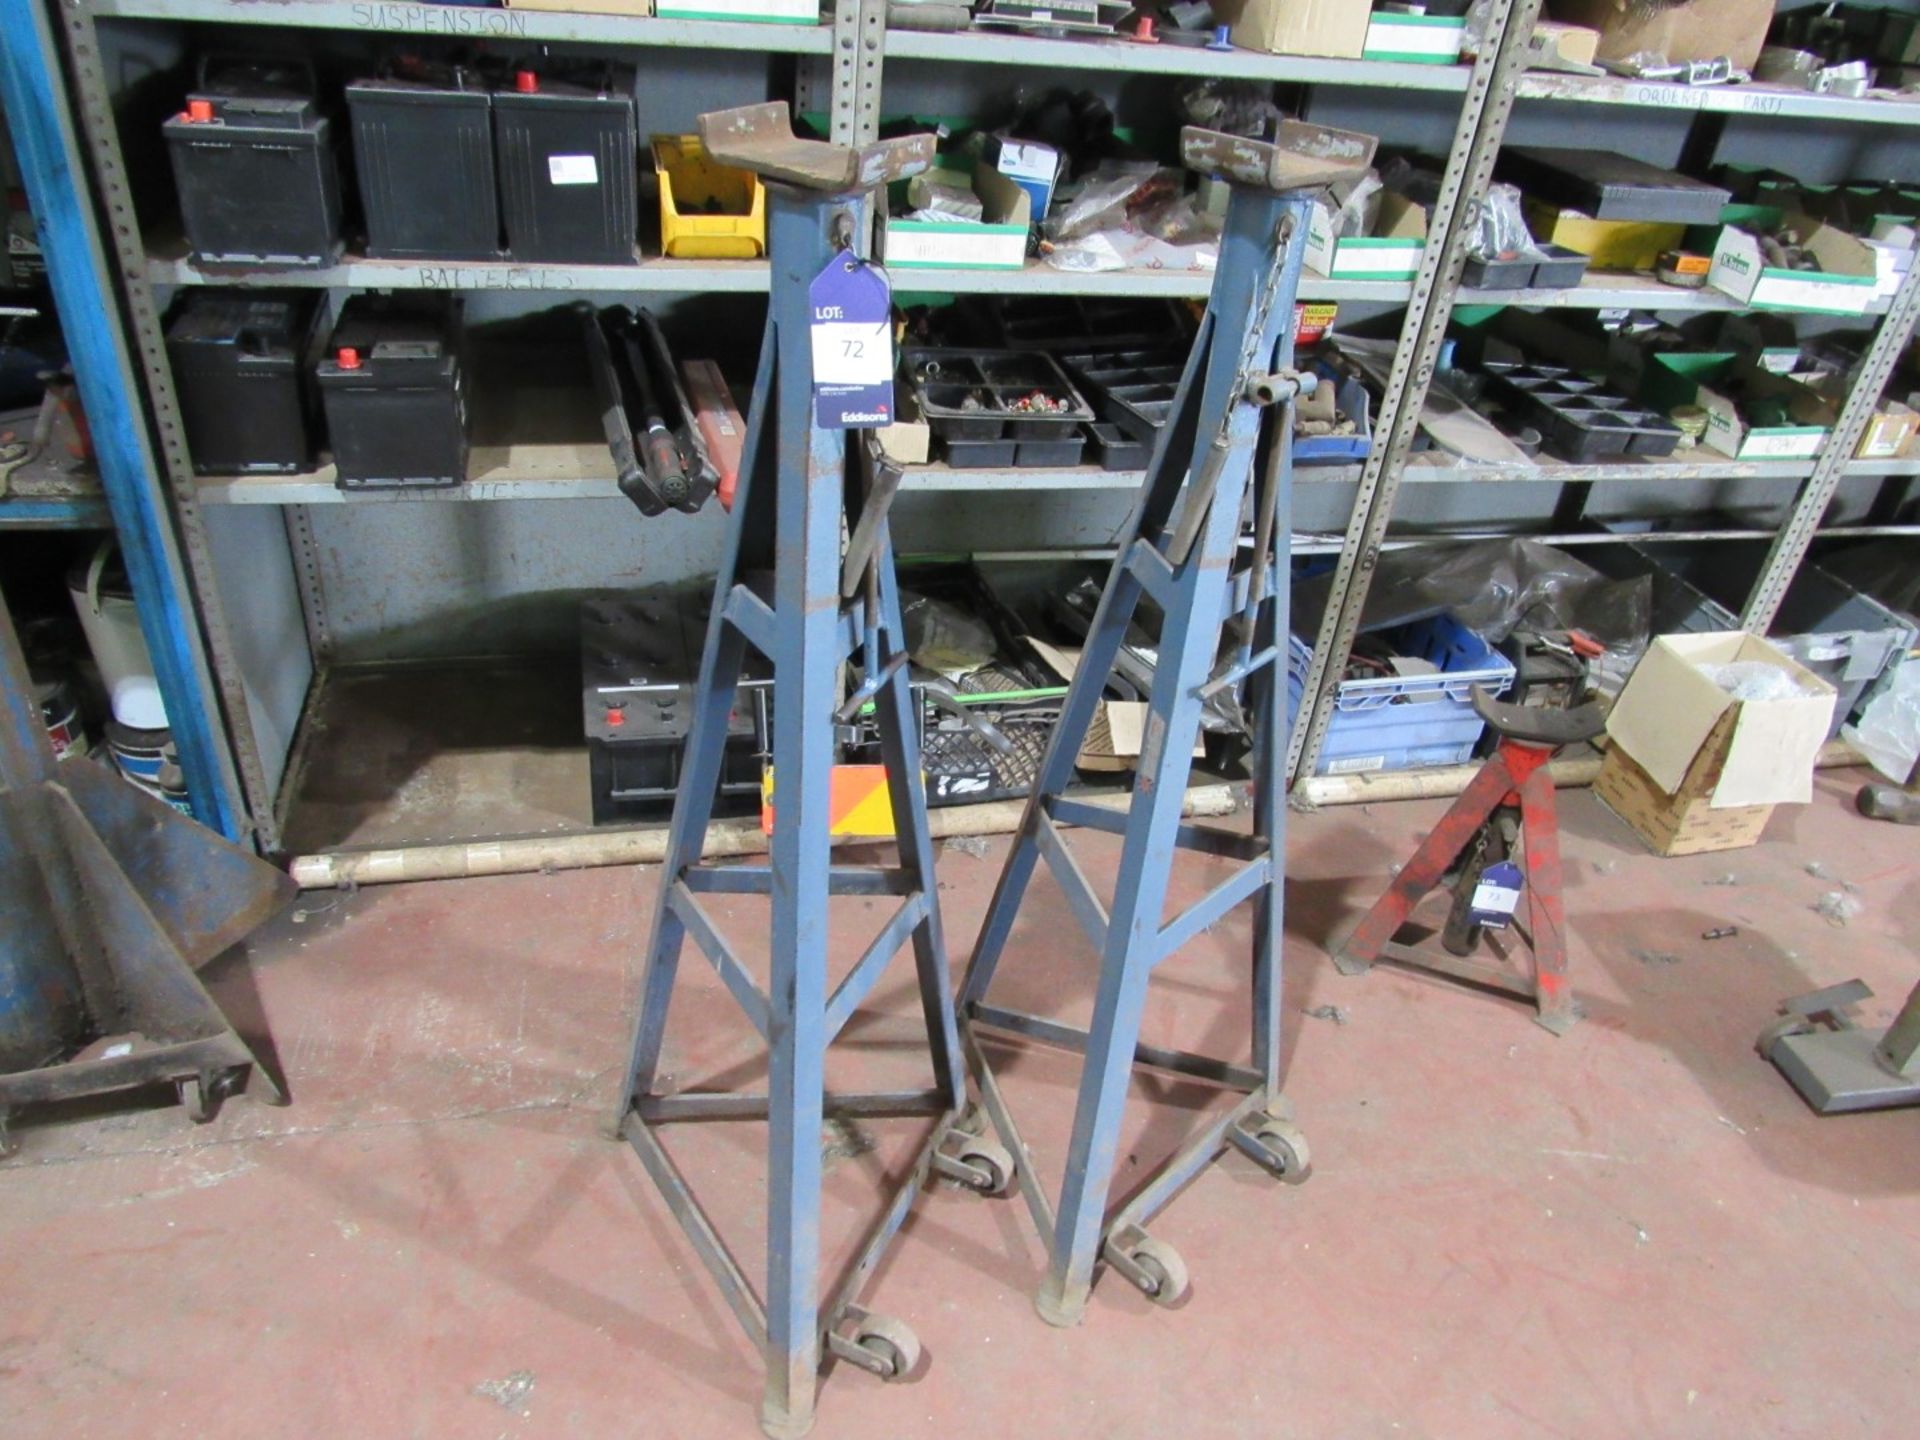 2 Axel stands